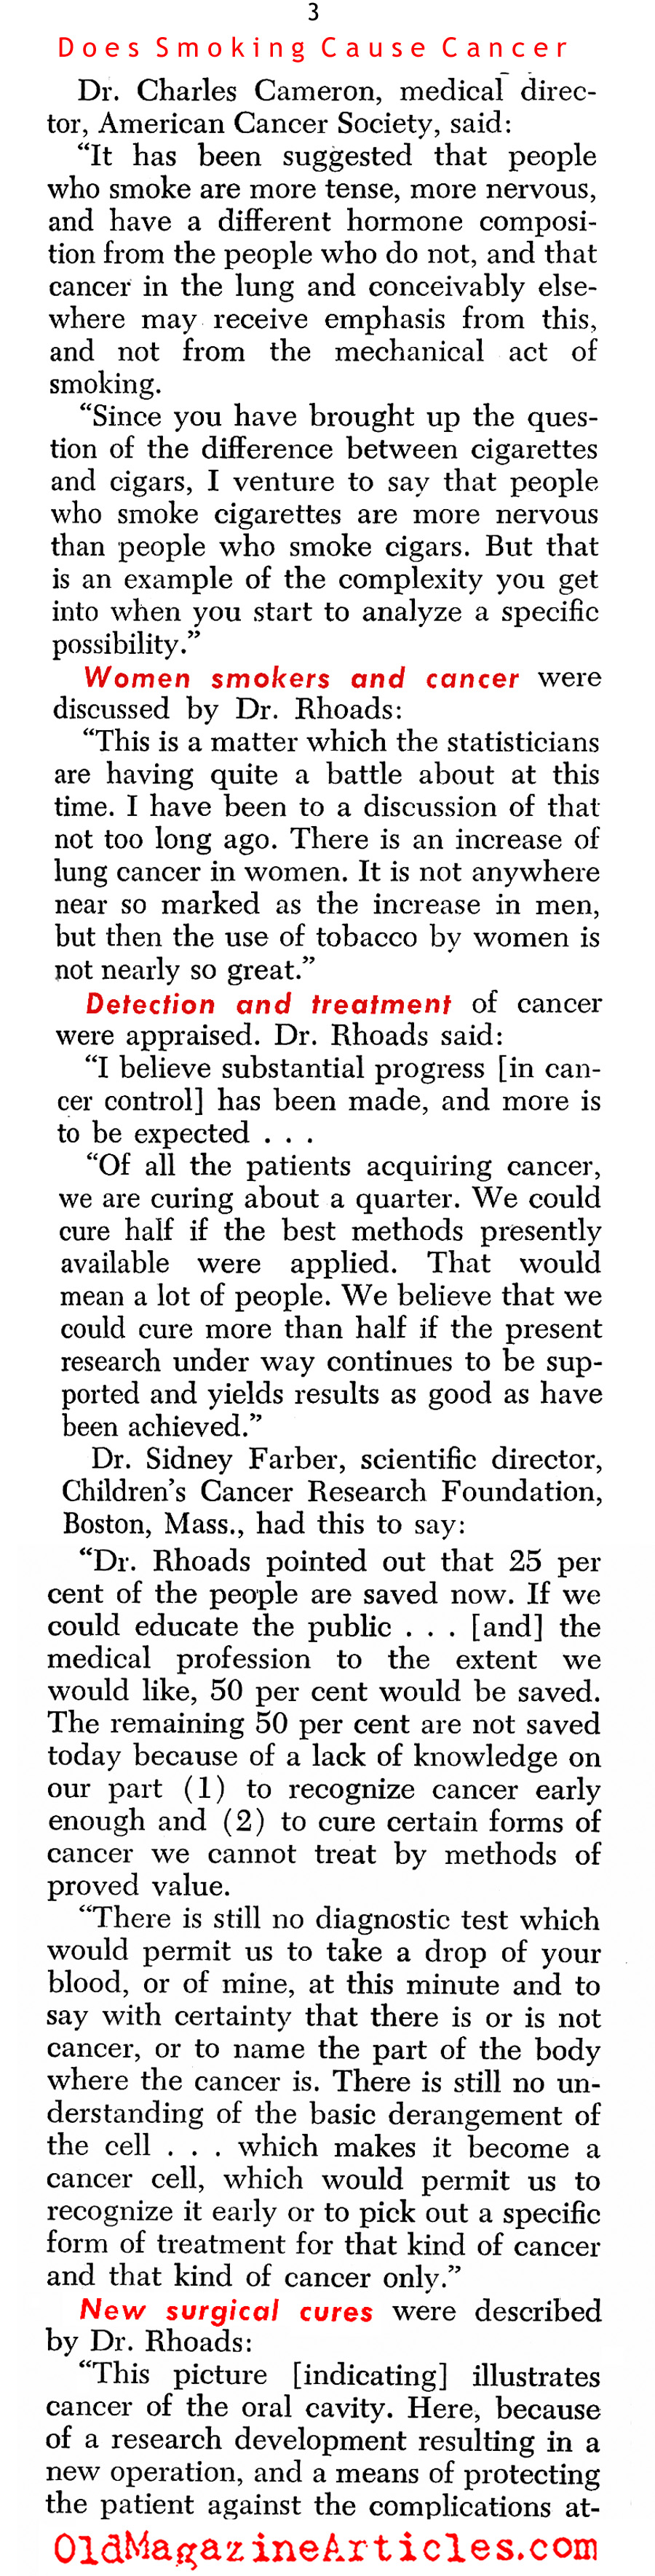 Does Smoking Really Cause Cancer? (United States News, 1953)